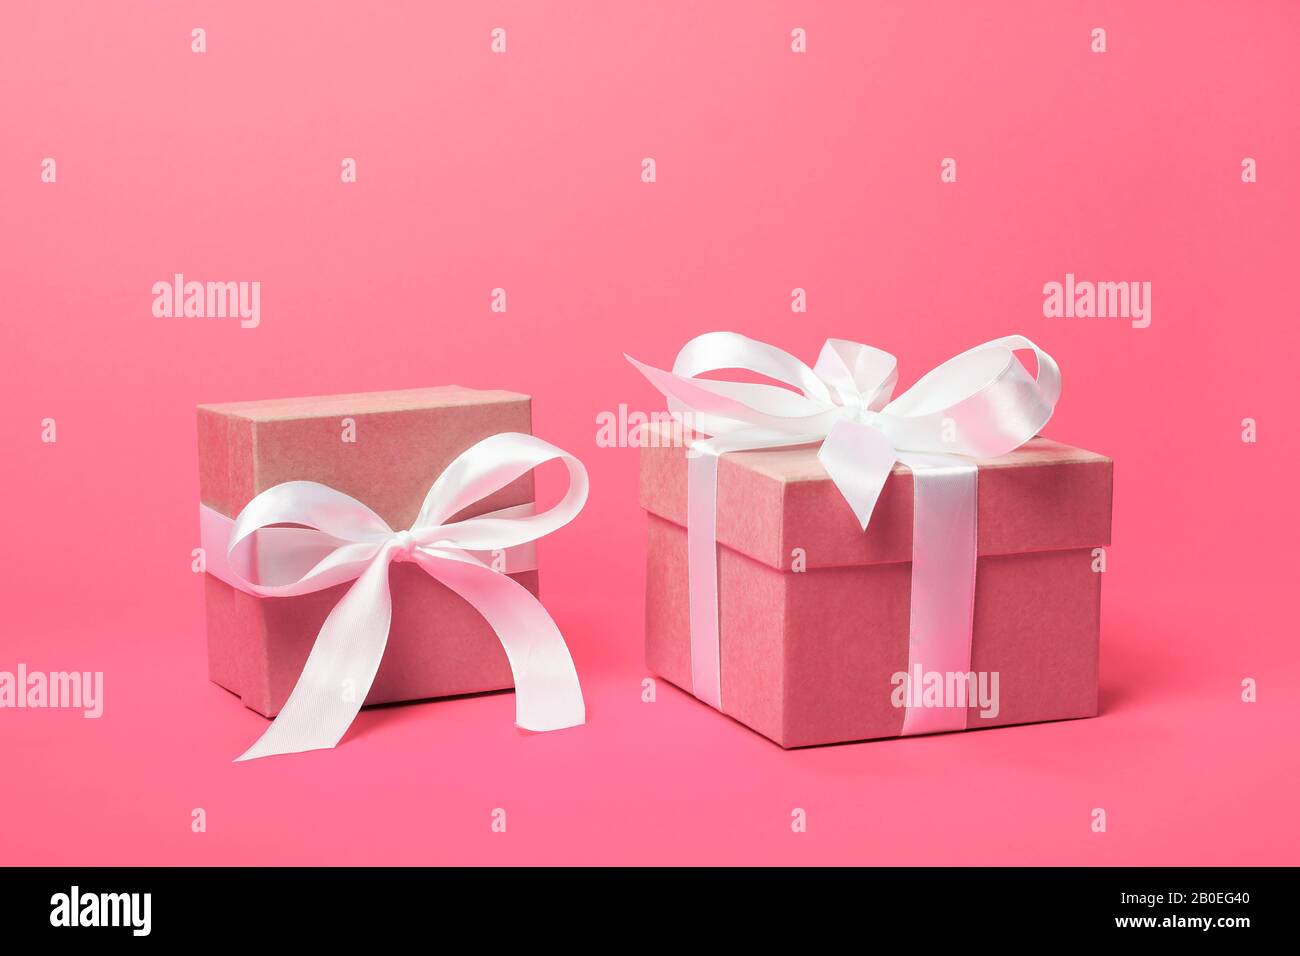 Trendy attractive minimalistic gifts on the coral pink background. Women's Day, St. Valentine's Day, Happy Birthday and other holidays concept. Stock Photo